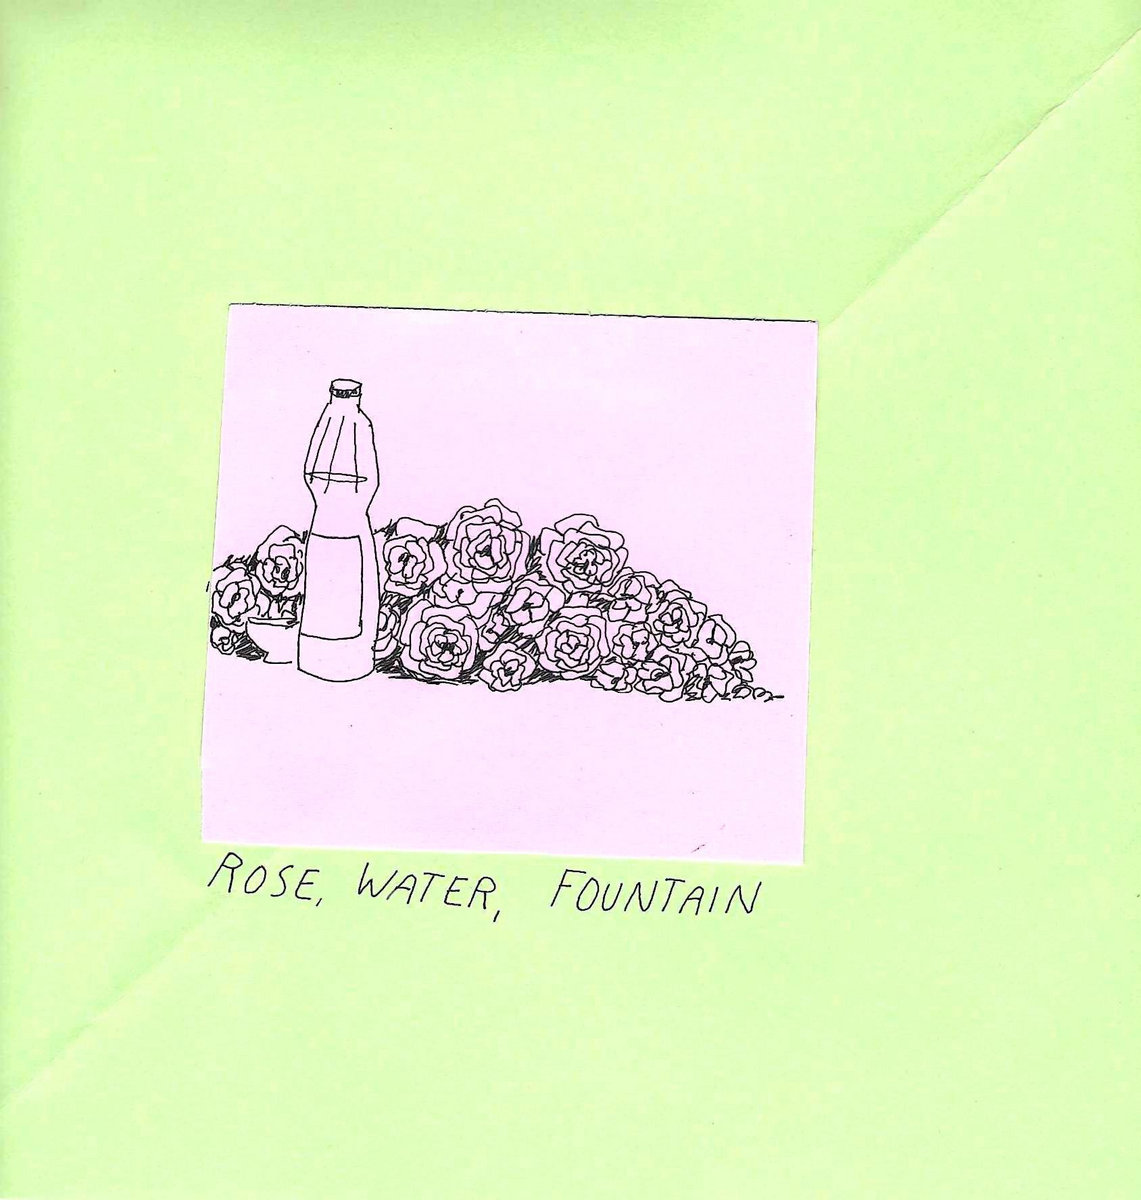 rose water fountain self titled EP cover - line drawing of a bottle and flowers on a pink square, stuck to a lime green background